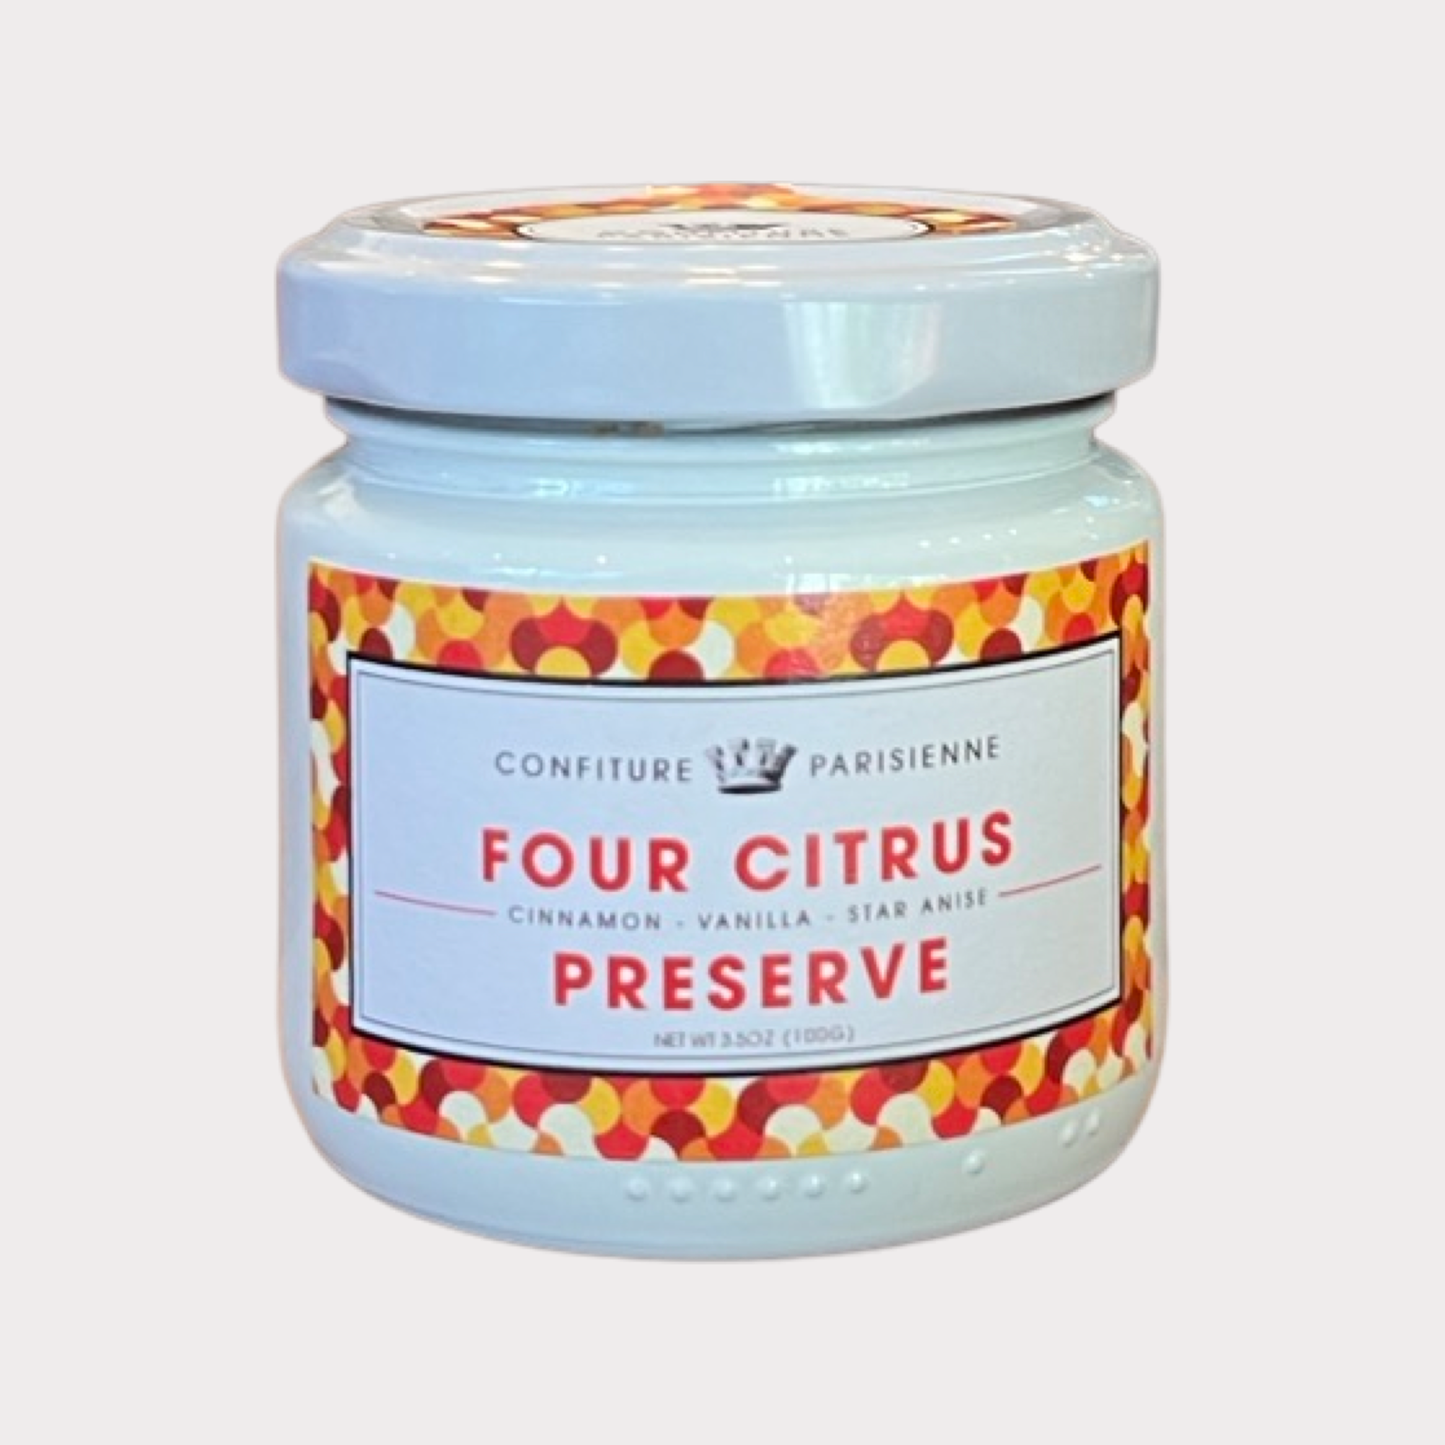 Confiture Parisienne Four Citrus Preserve with Star Anise, Cinnamon, and Vanilla